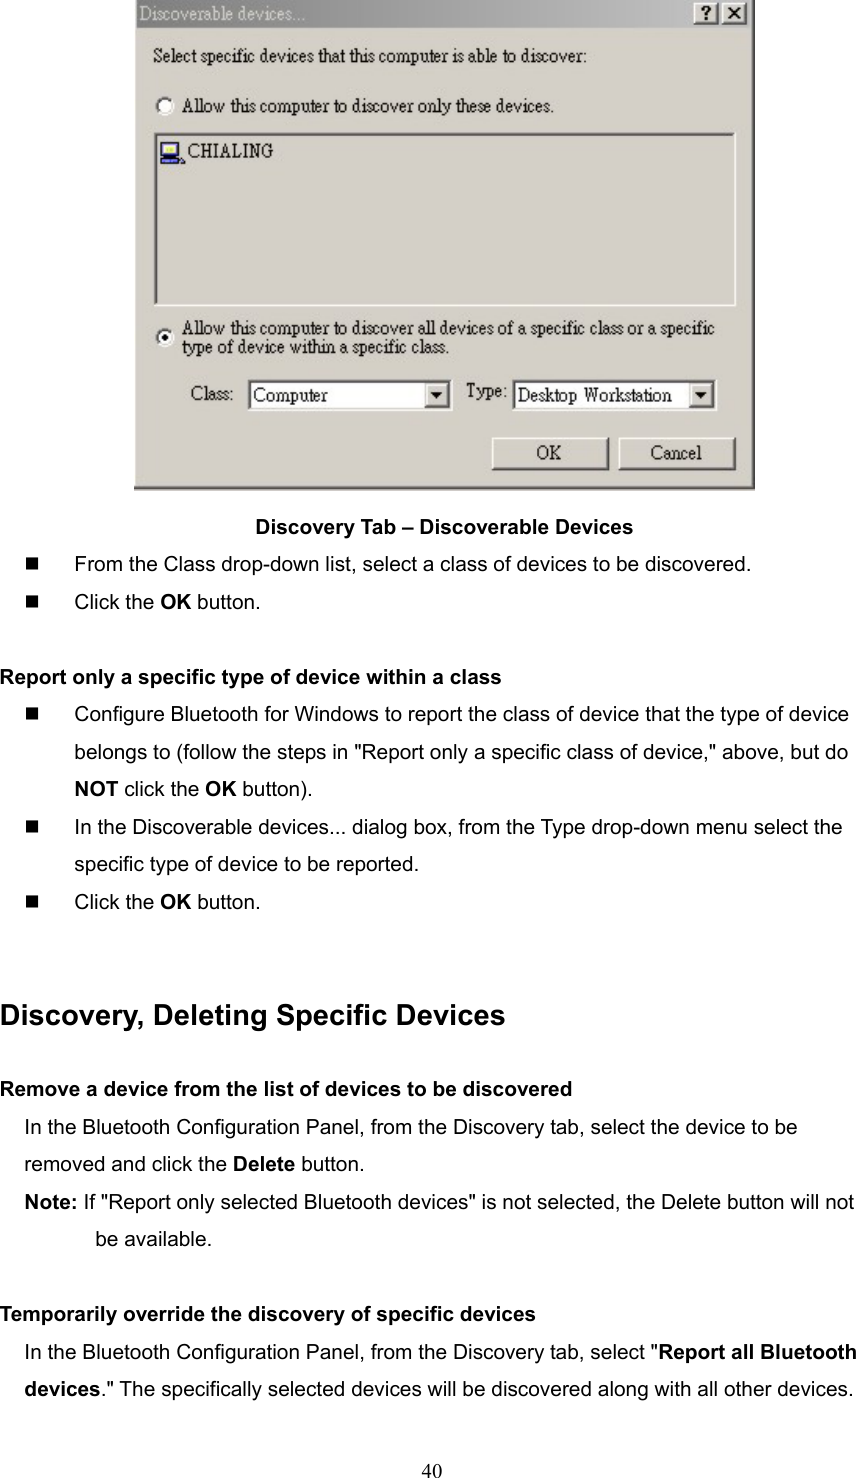  40  Discovery Tab – Discoverable Devices   From the Class drop-down list, select a class of devices to be discovered.   Click the OK button.  Report only a specific type of device within a class   Configure Bluetooth for Windows to report the class of device that the type of device belongs to (follow the steps in &quot;Report only a specific class of device,&quot; above, but do NOT click the OK button).   In the Discoverable devices... dialog box, from the Type drop-down menu select the specific type of device to be reported.   Click the OK button.   Discovery, Deleting Specific Devices  Remove a device from the list of devices to be discovered In the Bluetooth Configuration Panel, from the Discovery tab, select the device to be removed and click the Delete button. Note: If &quot;Report only selected Bluetooth devices&quot; is not selected, the Delete button will not   be available.  Temporarily override the discovery of specific devices In the Bluetooth Configuration Panel, from the Discovery tab, select &quot;Report all Bluetooth devices.&quot; The specifically selected devices will be discovered along with all other devices. 